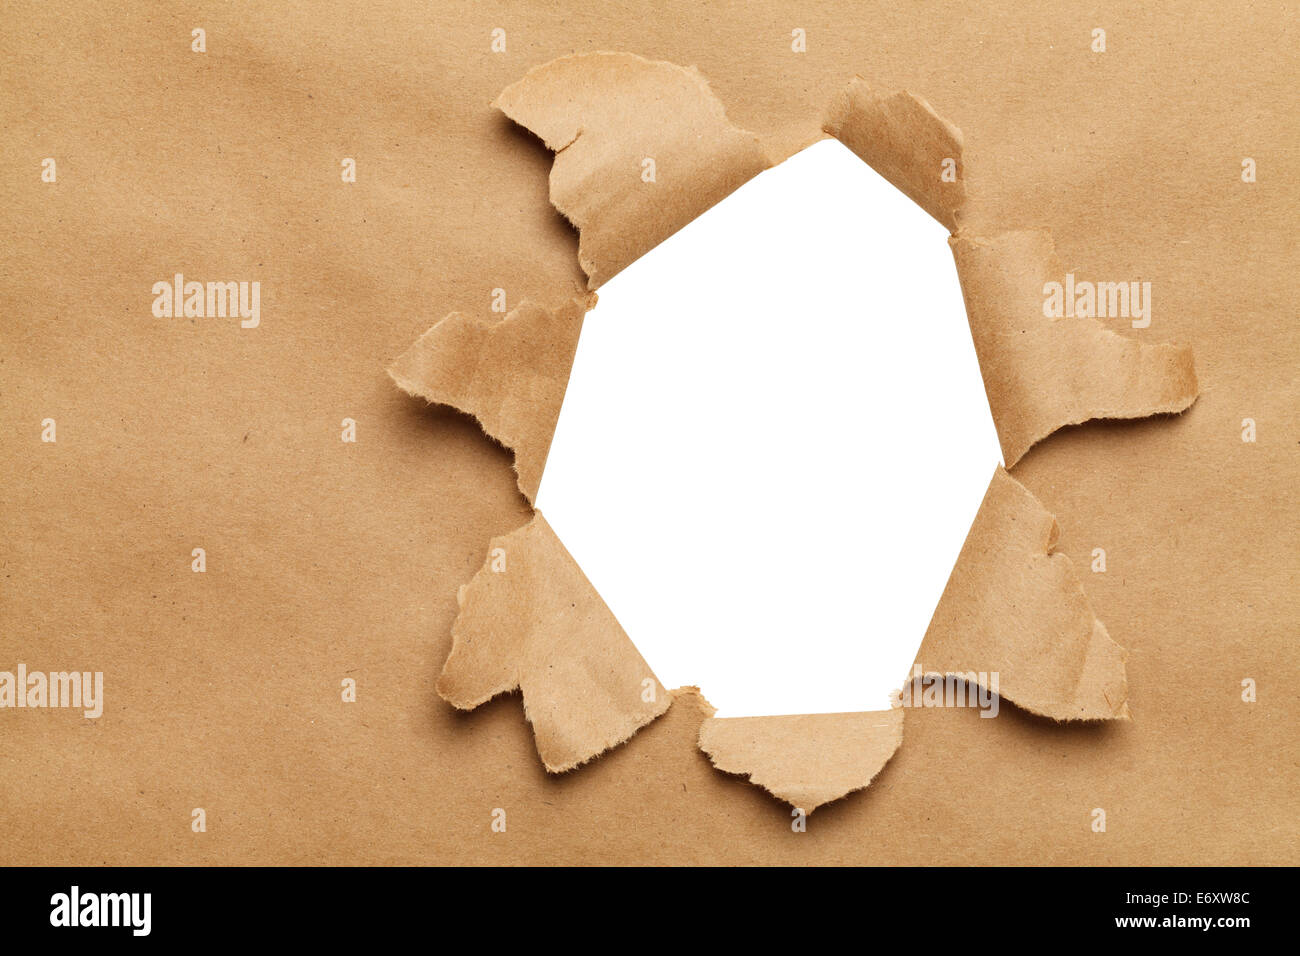 Large Hole in Brown Paper With White Background. Stock Photo